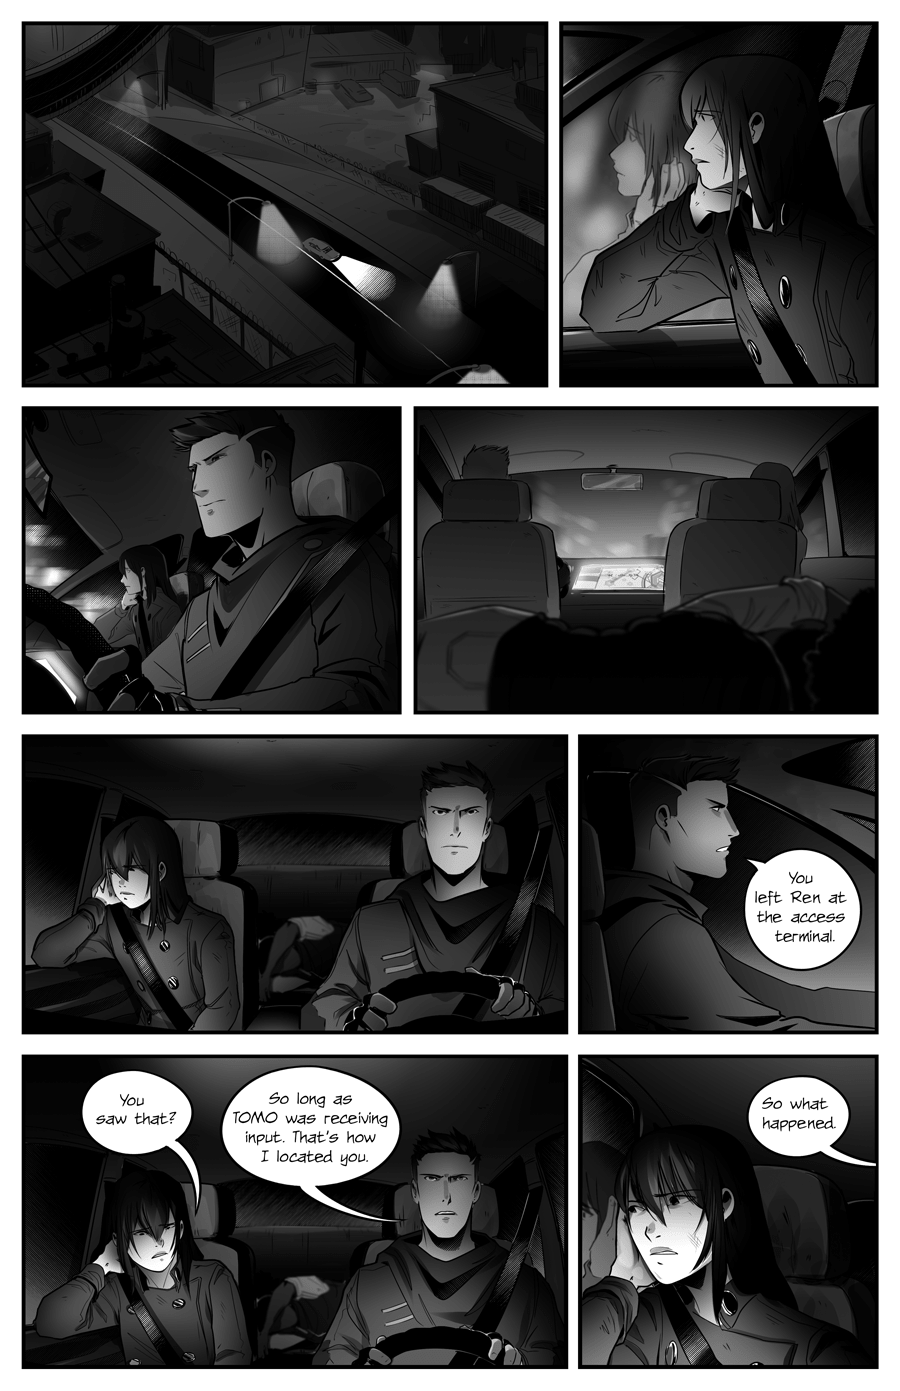 Centralia 2050 chapter 5 page 12